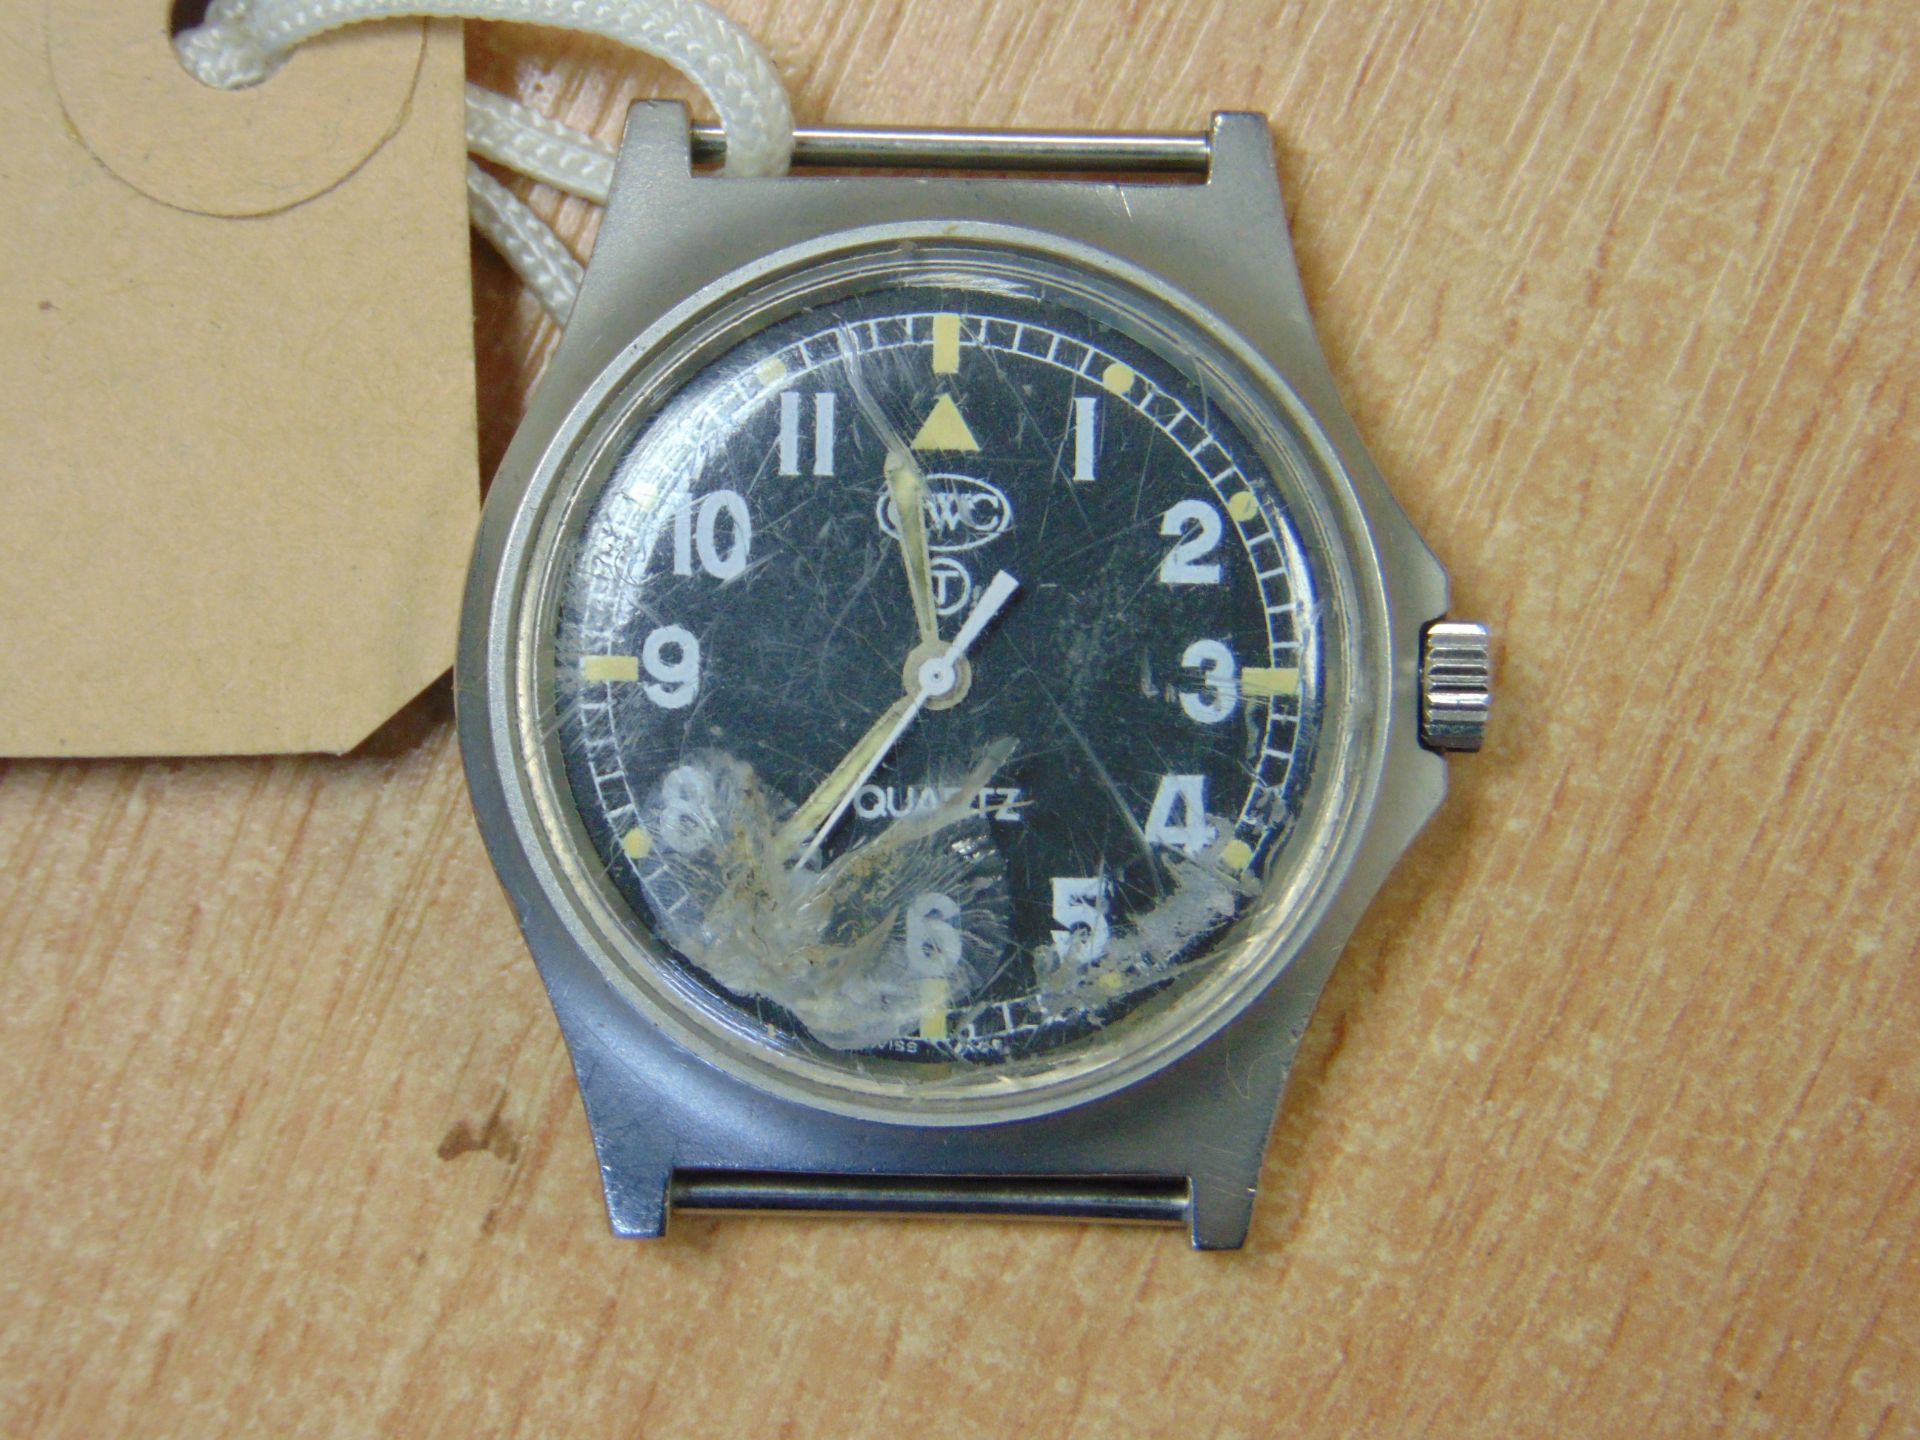 CWC W10 BRITISH ARMY SERVICE WATCH -WATER RESISTANT TO 5 ATM NATO MARKS DATE 2005 *CHIP IN GLASS* - Image 7 of 7